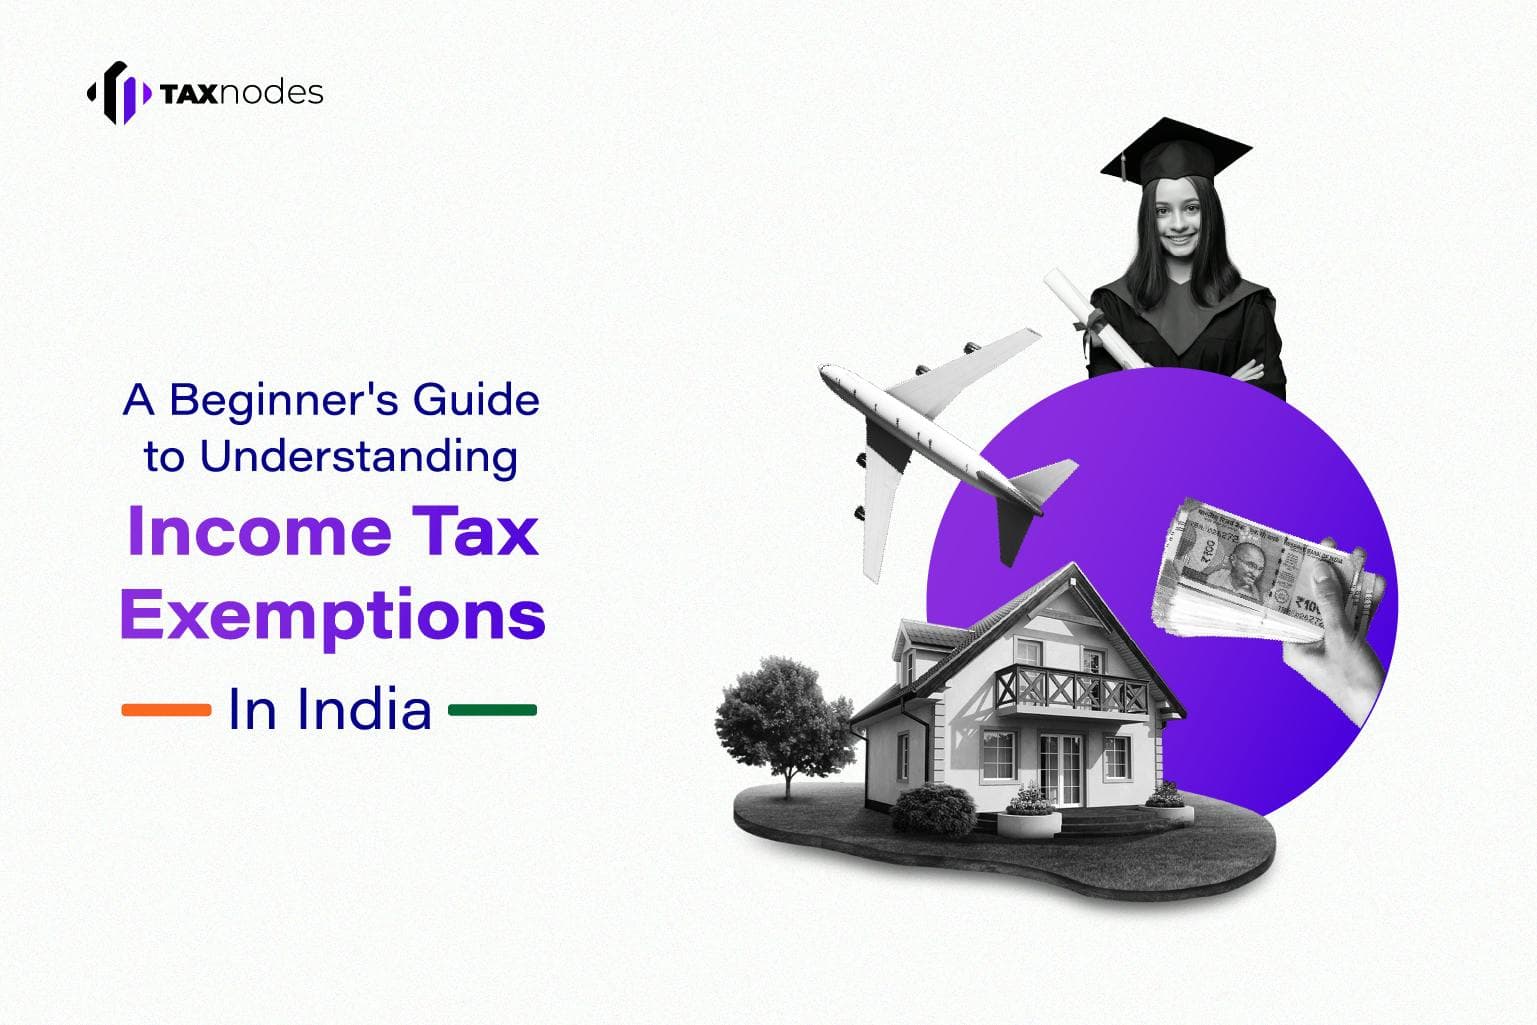 A beginner's guide to understanding income tax exemptions in India